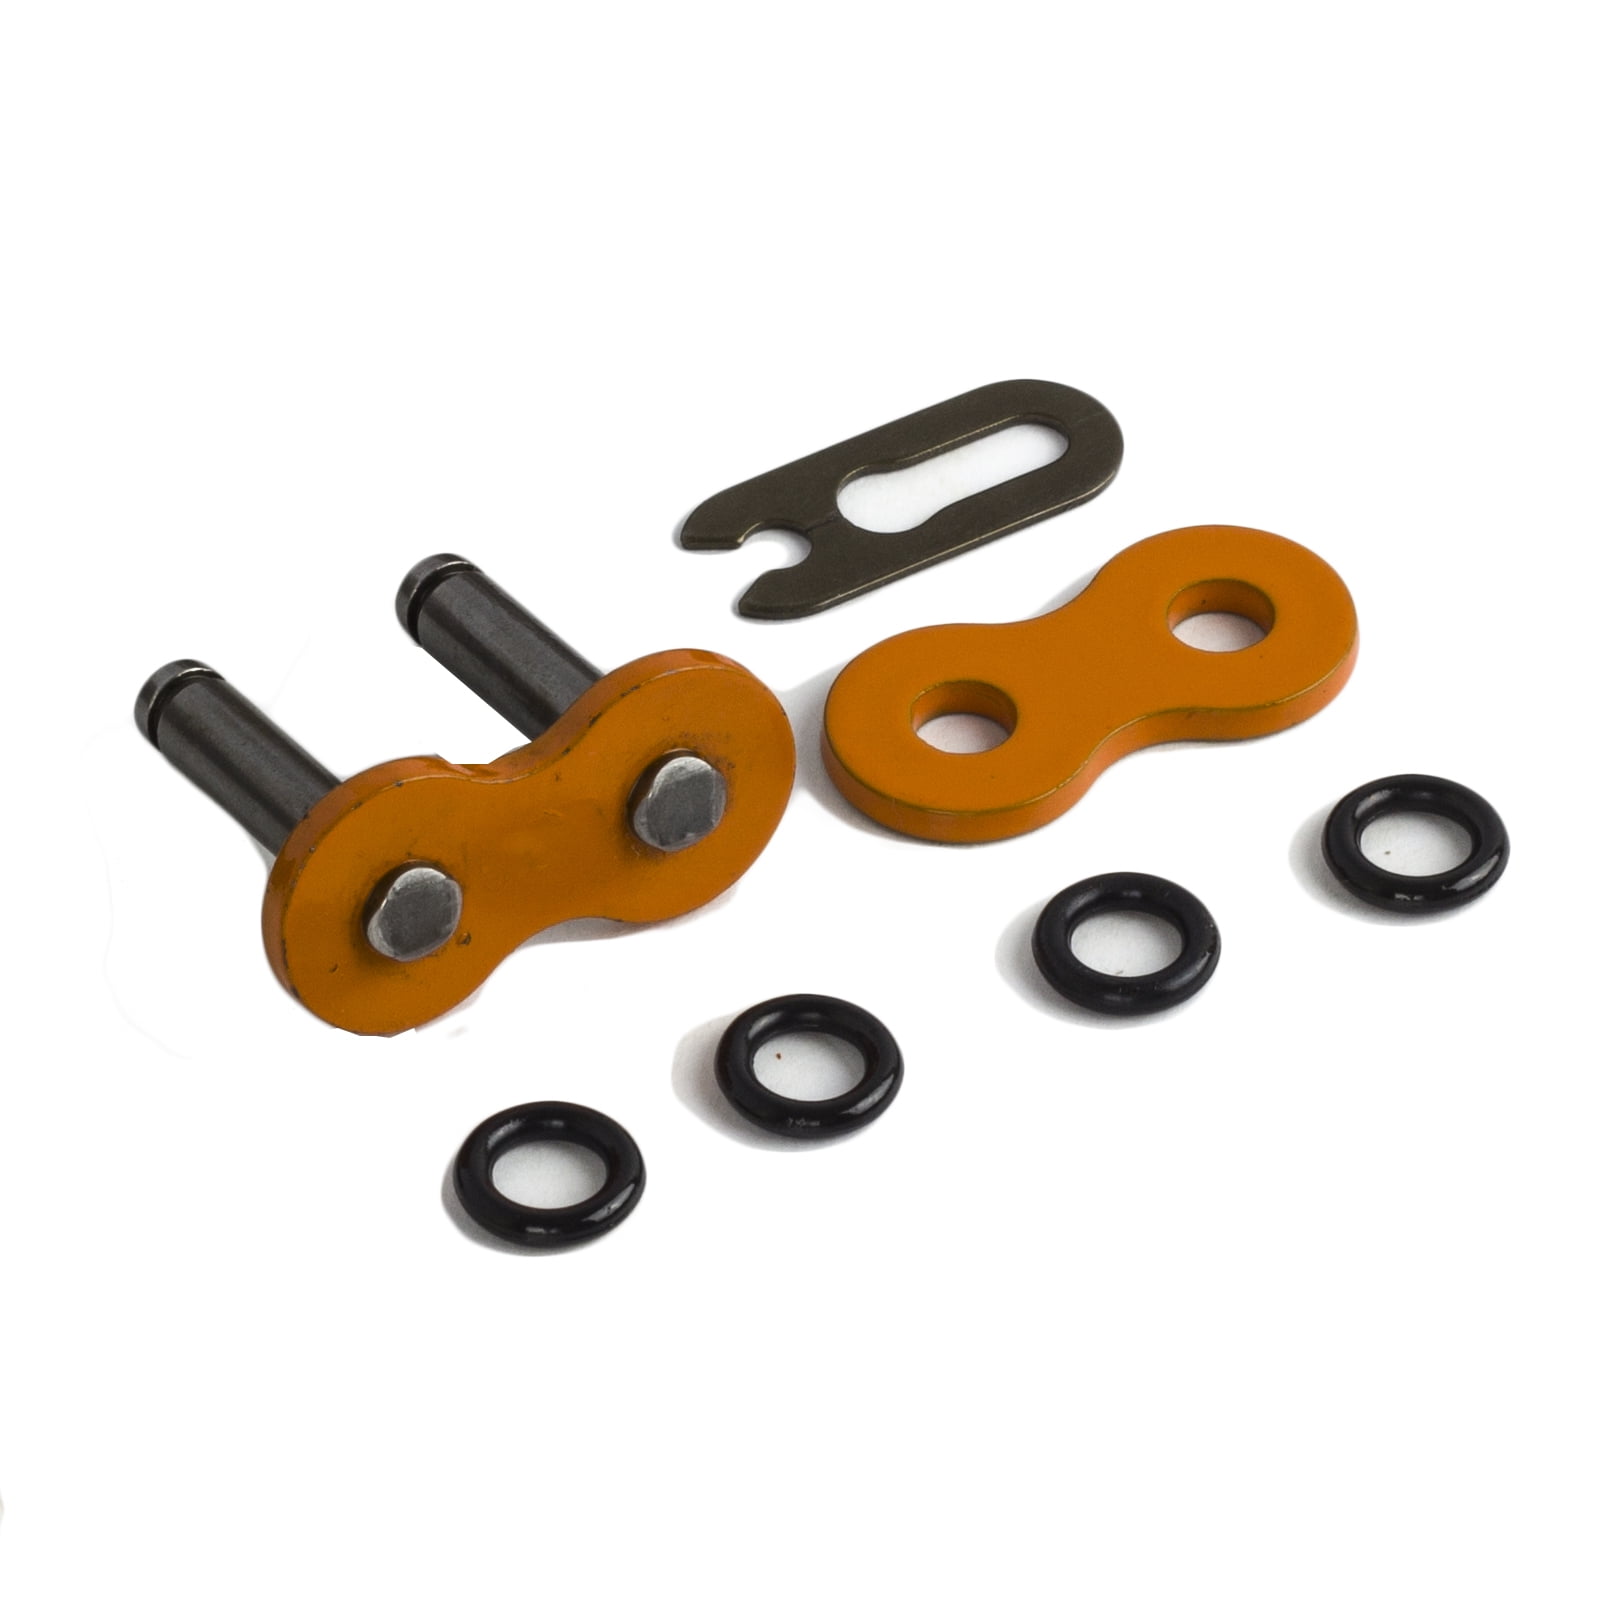 NICHE 530 Drive Chain 102 Links O-Ring With Connecting Master Link for Motorcycle ATV Dirt Bike 